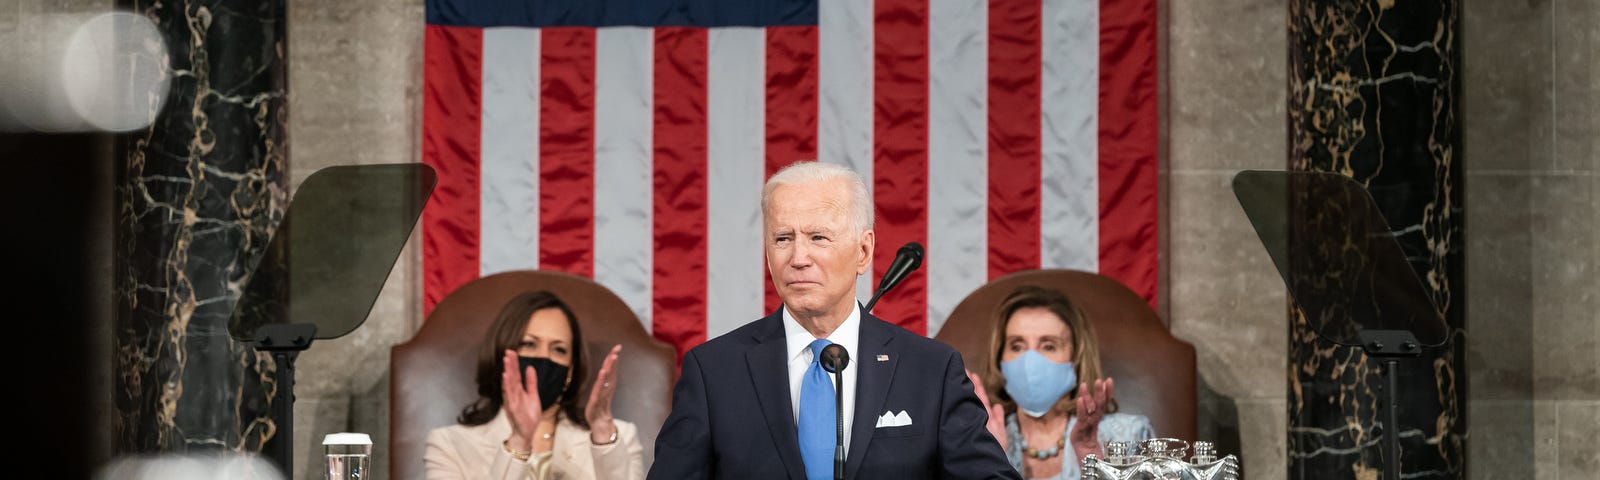 Above President Joe Biden, joined by Vice President Kamala Harris and House Speaker Nancy Pelosi, D-Calif., delivers remarks during a Joint Session of Congress Wednesday, April 28, 2021, at the U.S. Capitol in Washington, D.C. (Official White House Photo by Adam Schultz)